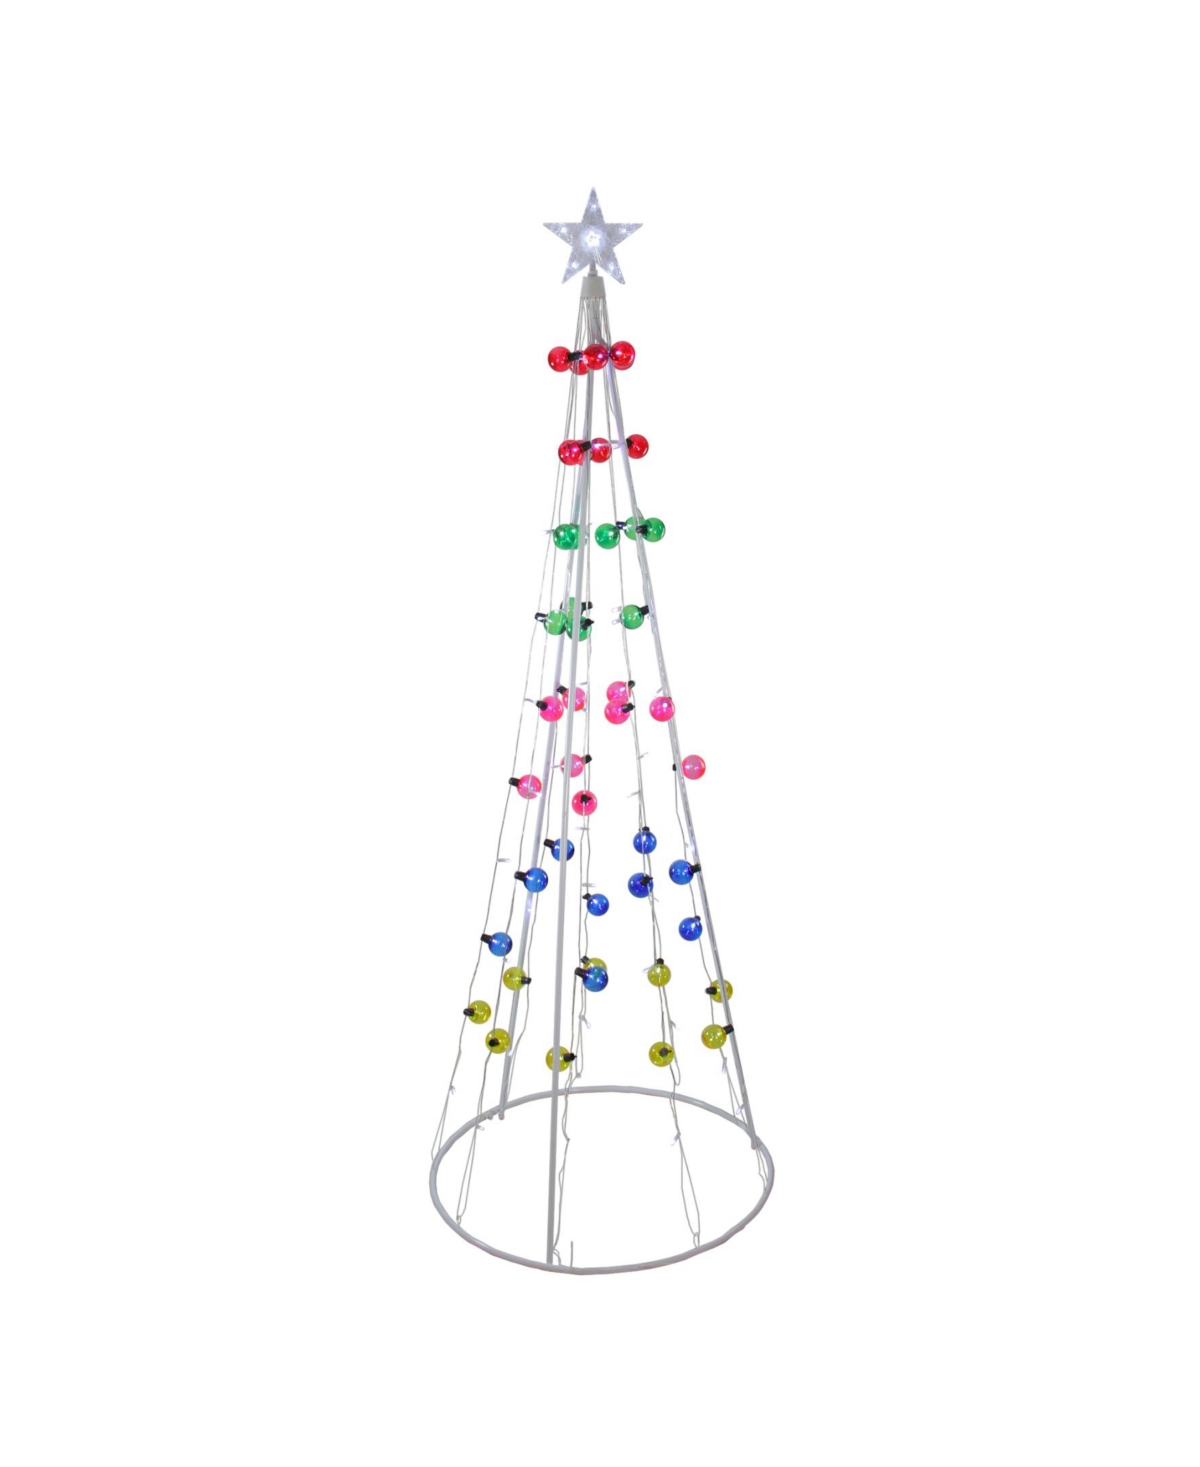 6' Multi-Colored Lighted Show Cone Christmas Tree Outdoor Decoration - Multi